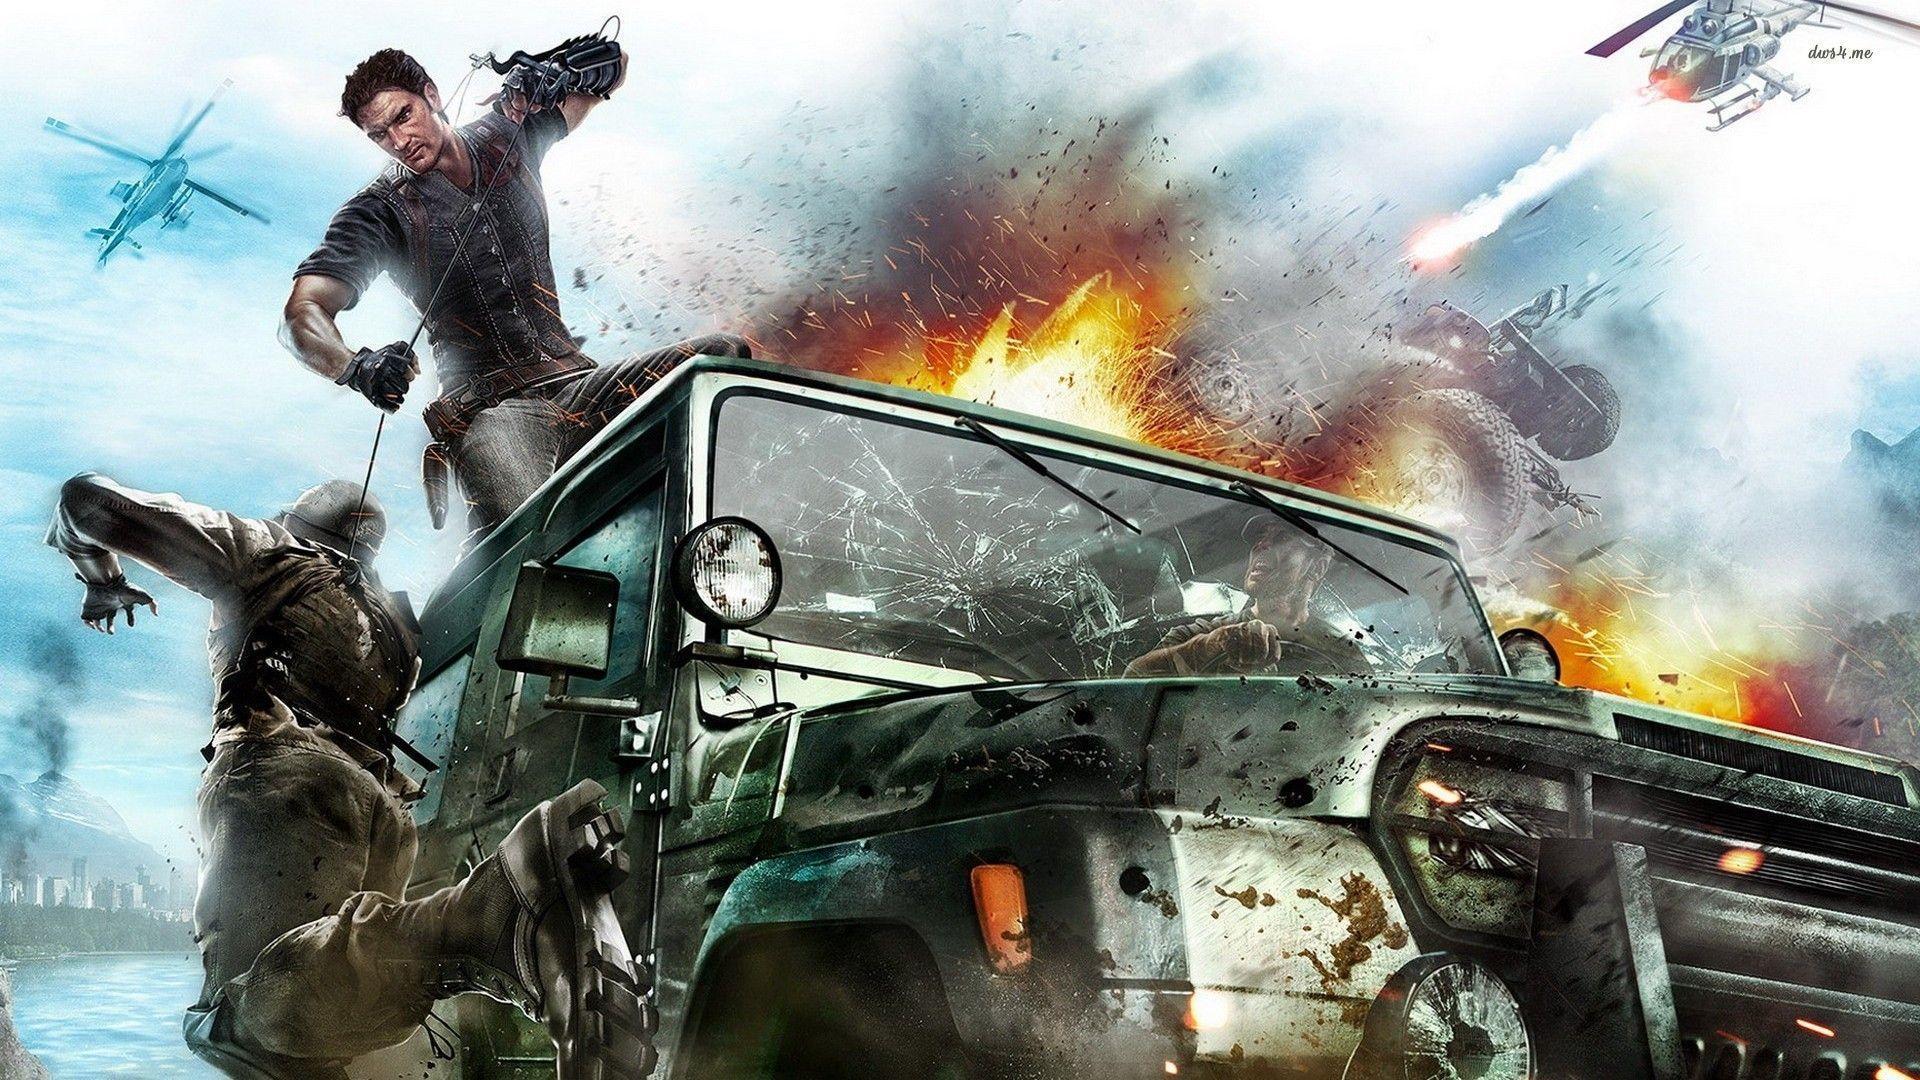 just cause 2 wallpaper 1080p